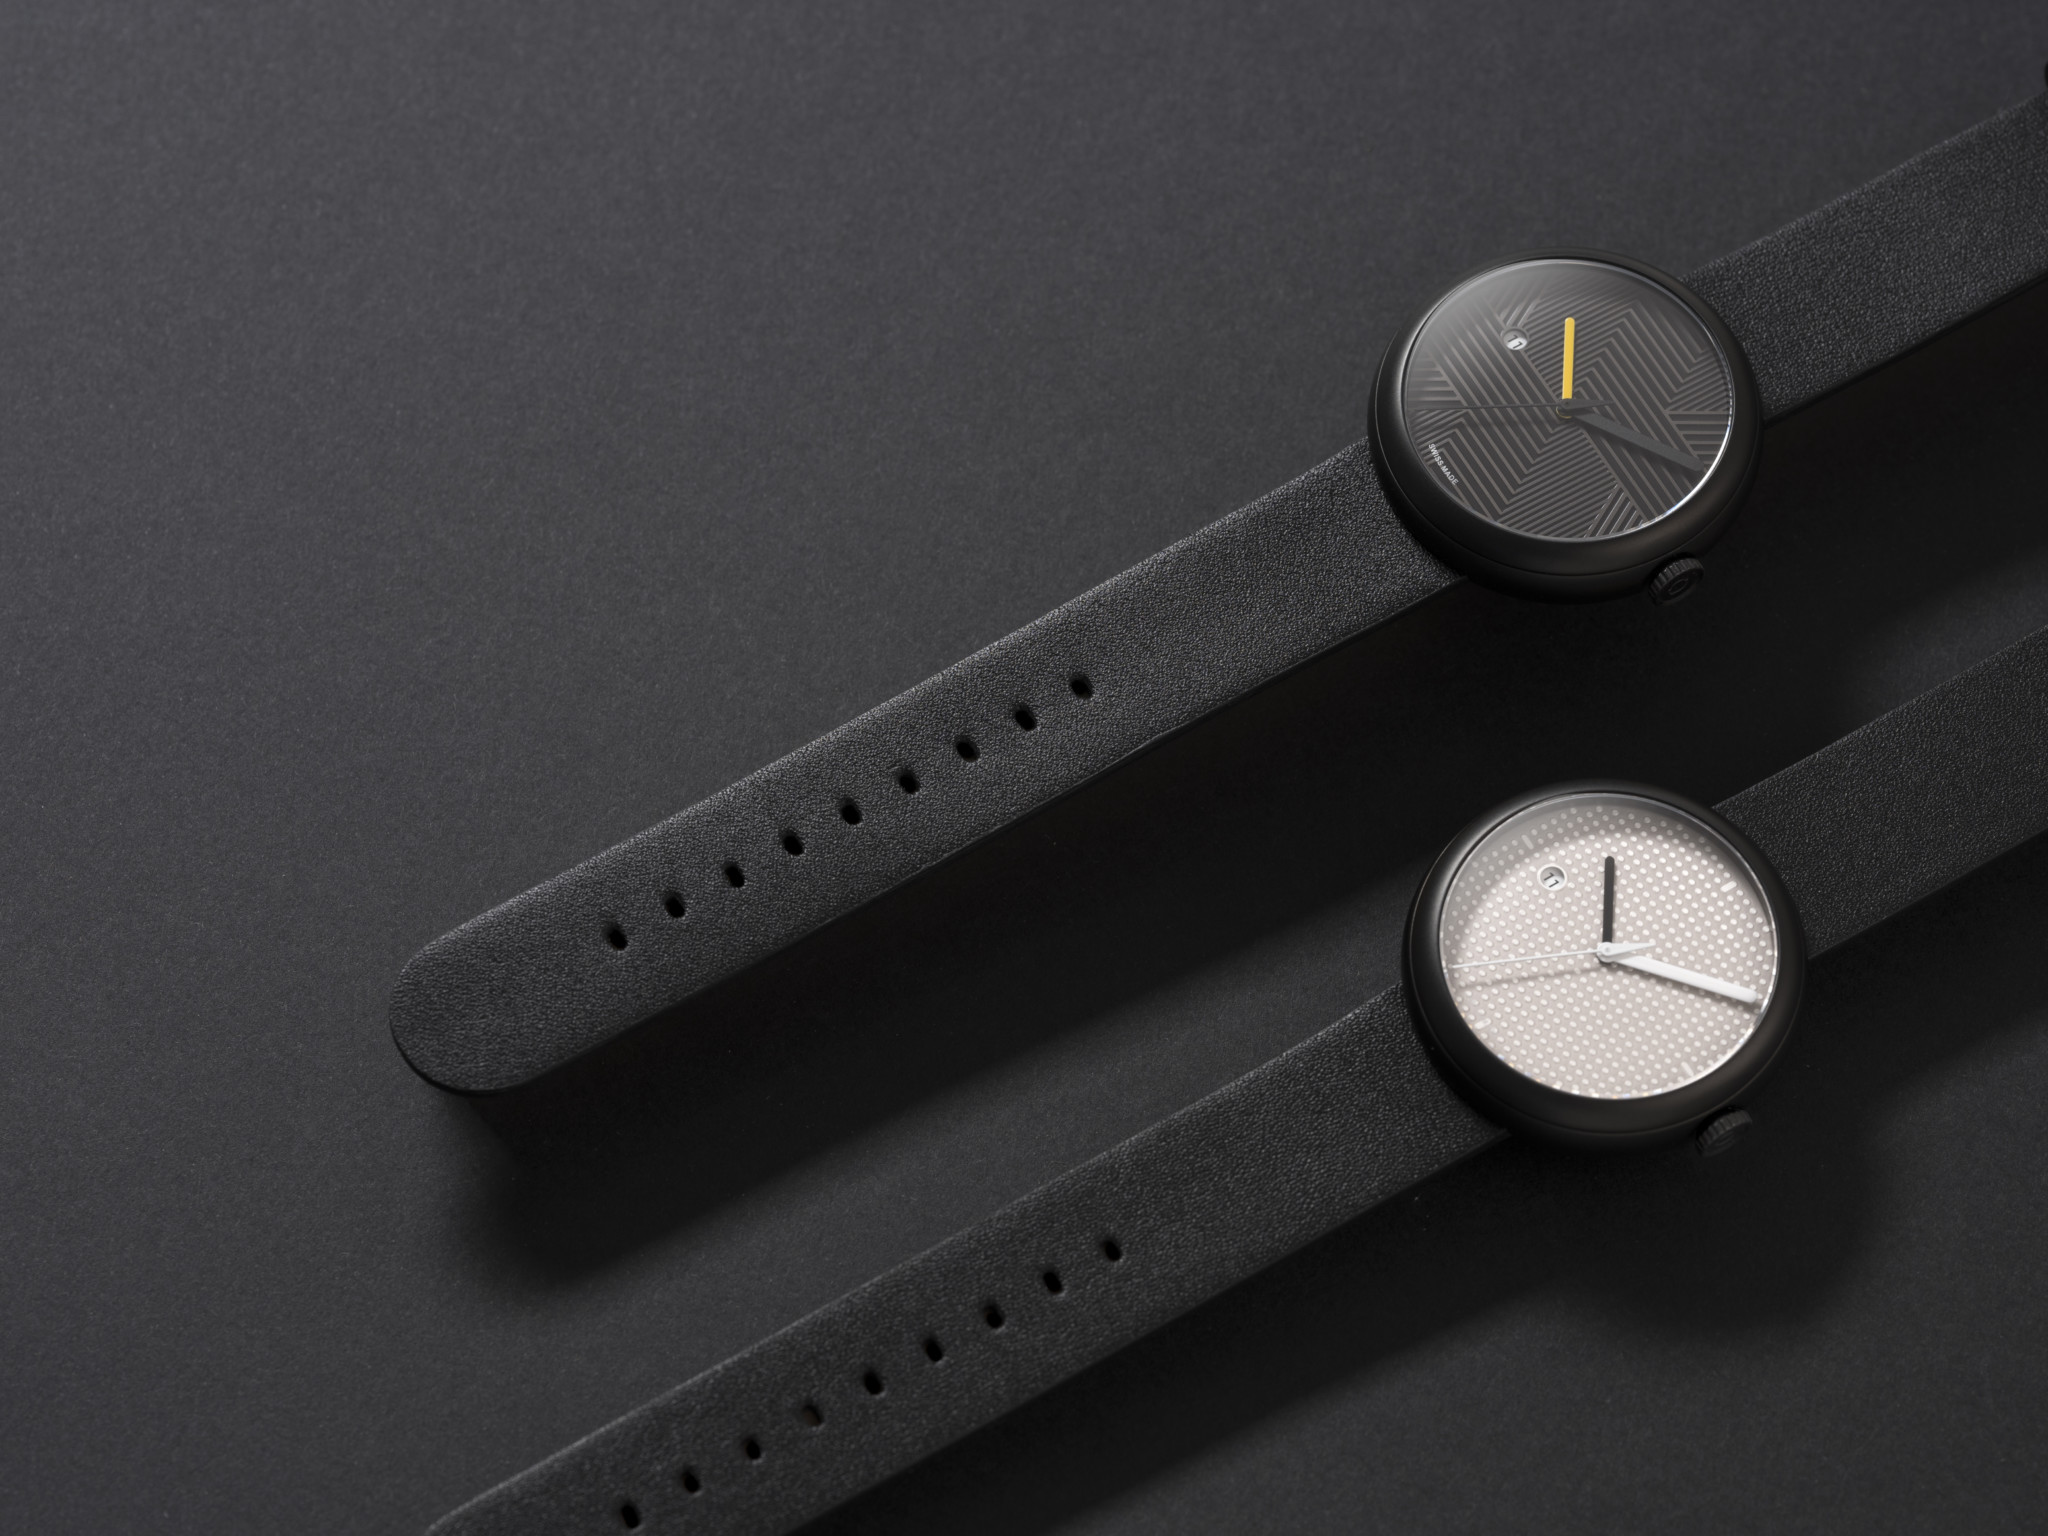 Objest-automatic-watch-pair